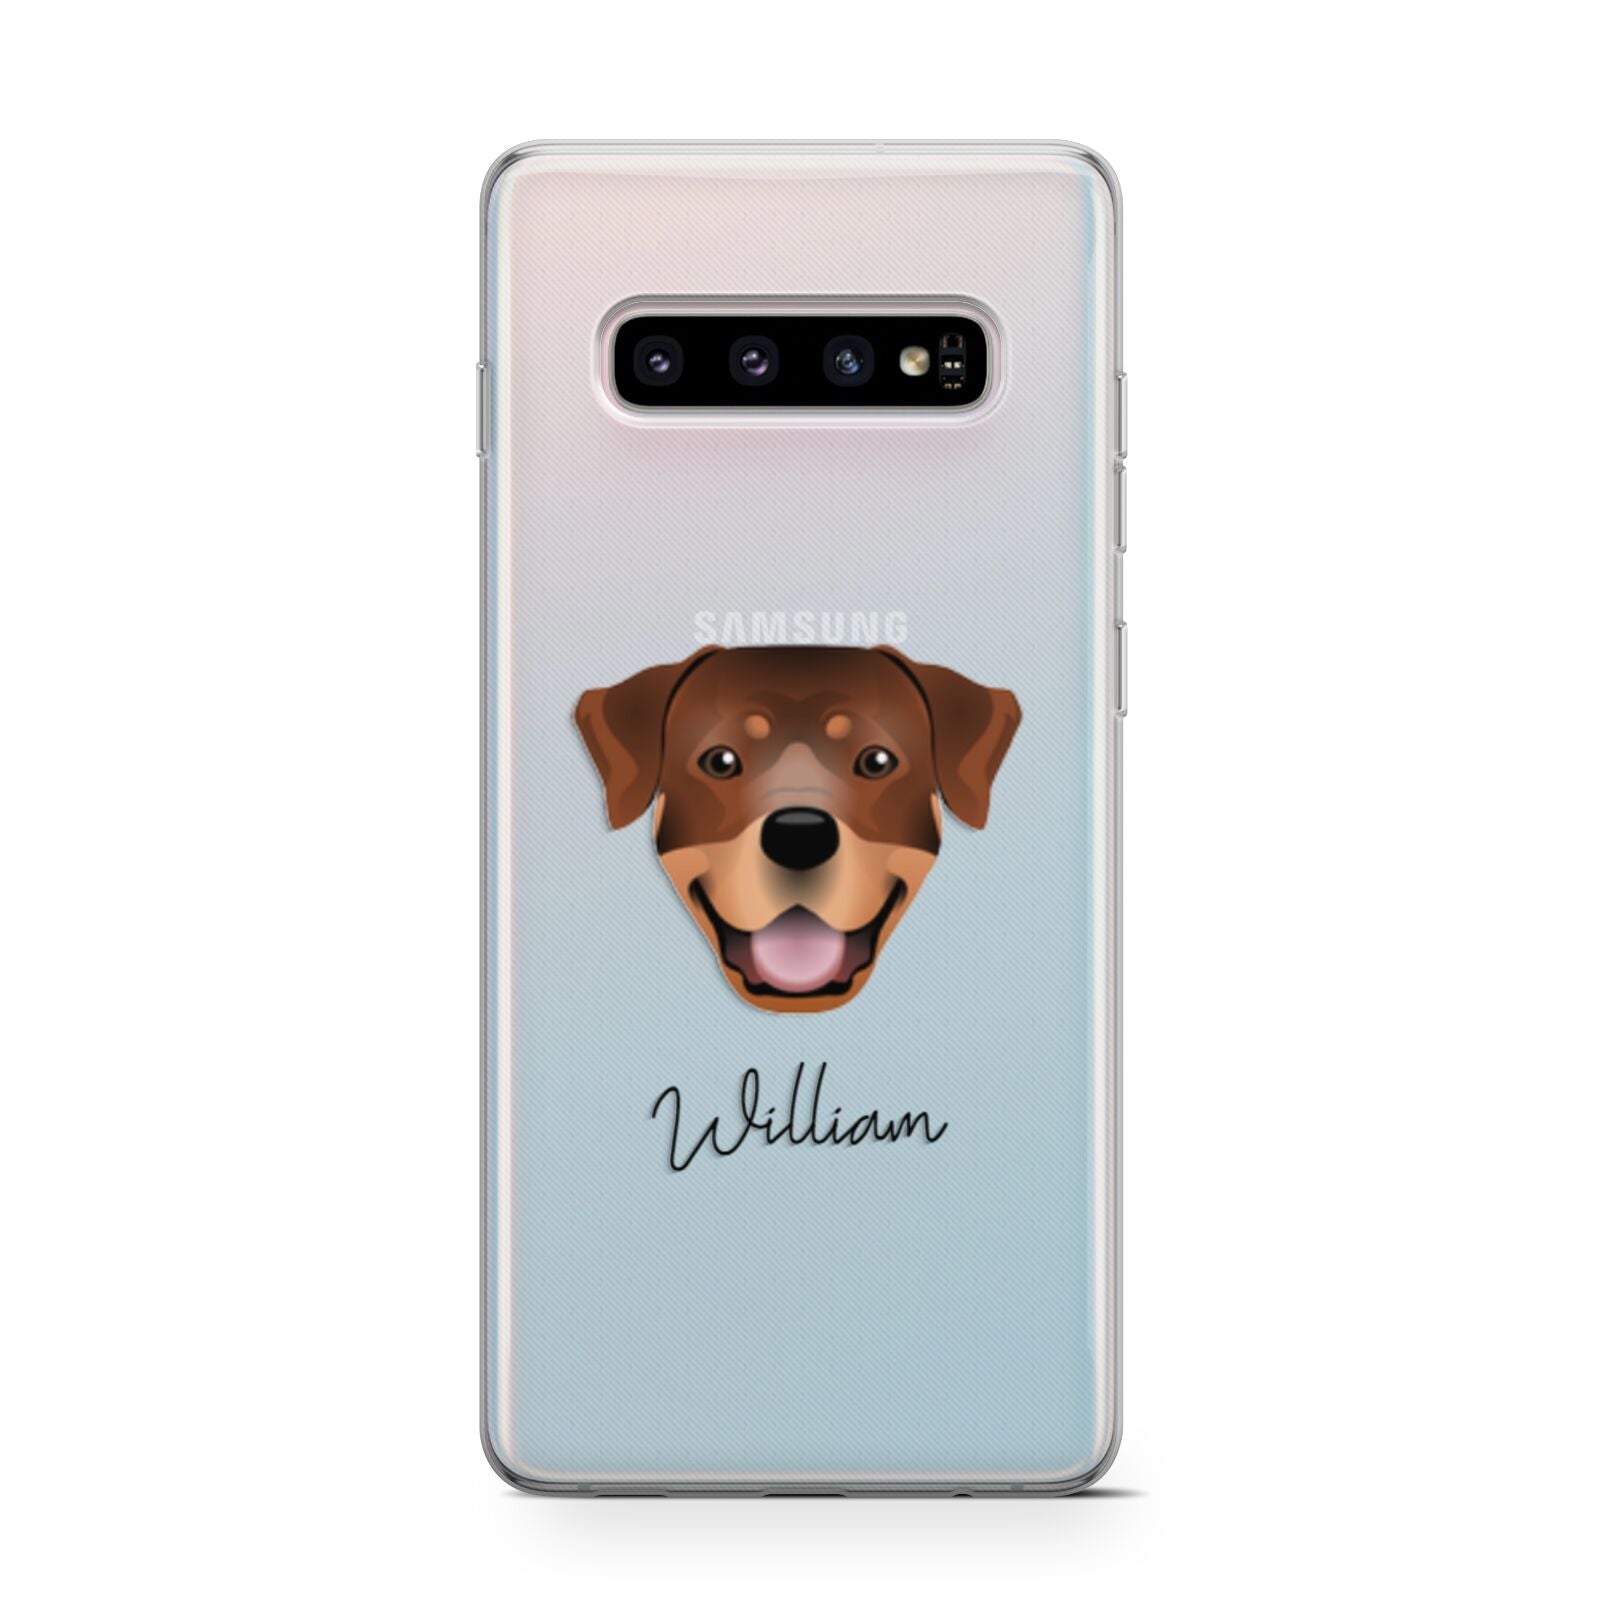 Rottweiler Personalised Samsung Galaxy S10 Case